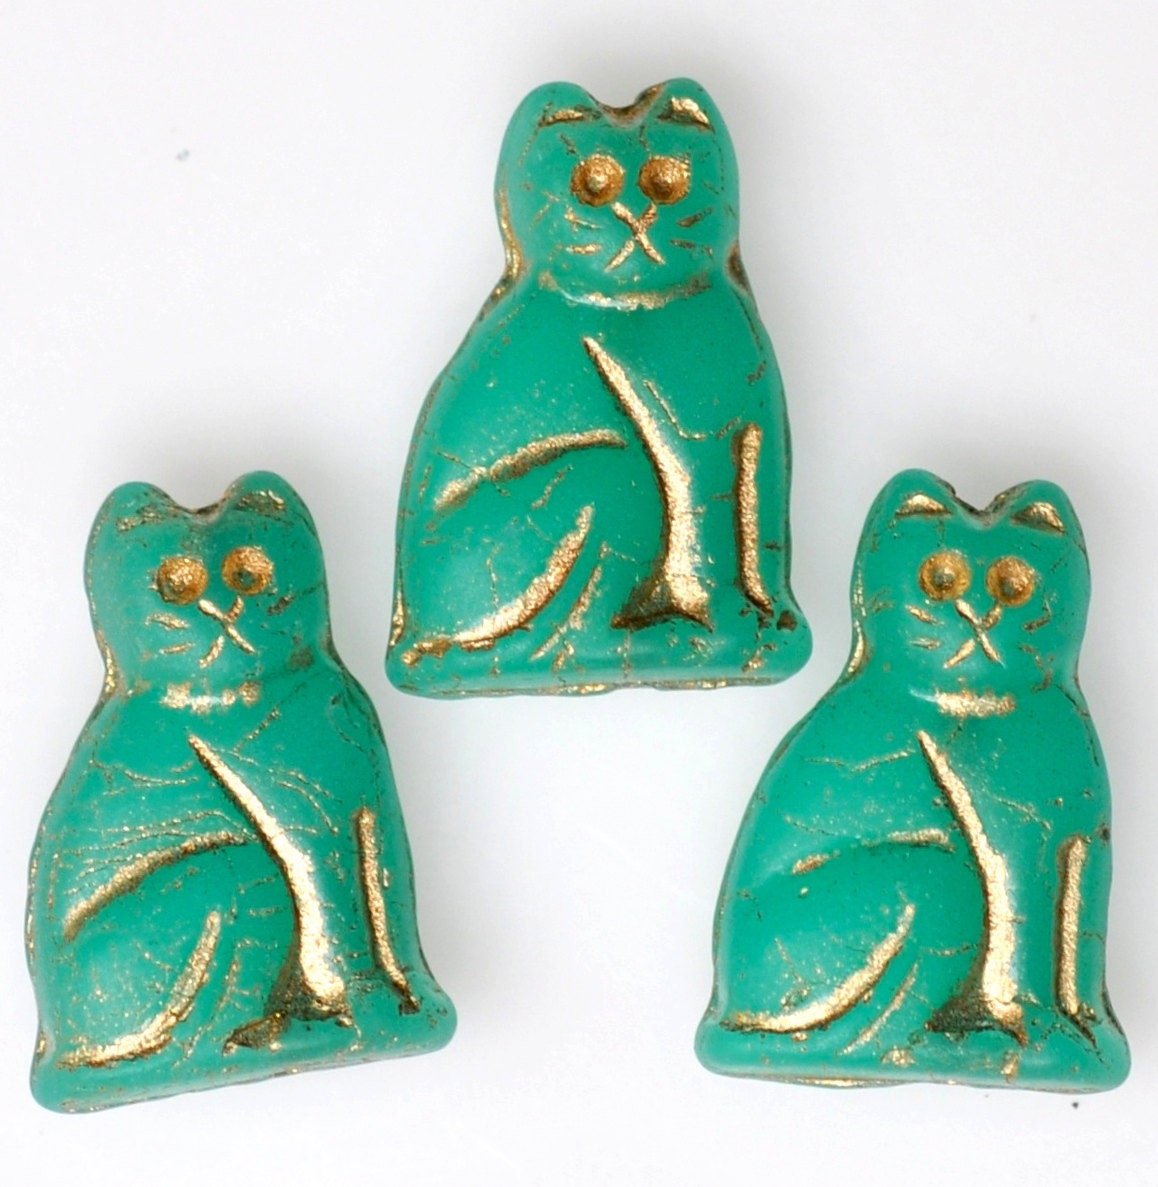 15mm Seated Cat Beads - Czech Glass Cat Beads - White Gold - Qty 10